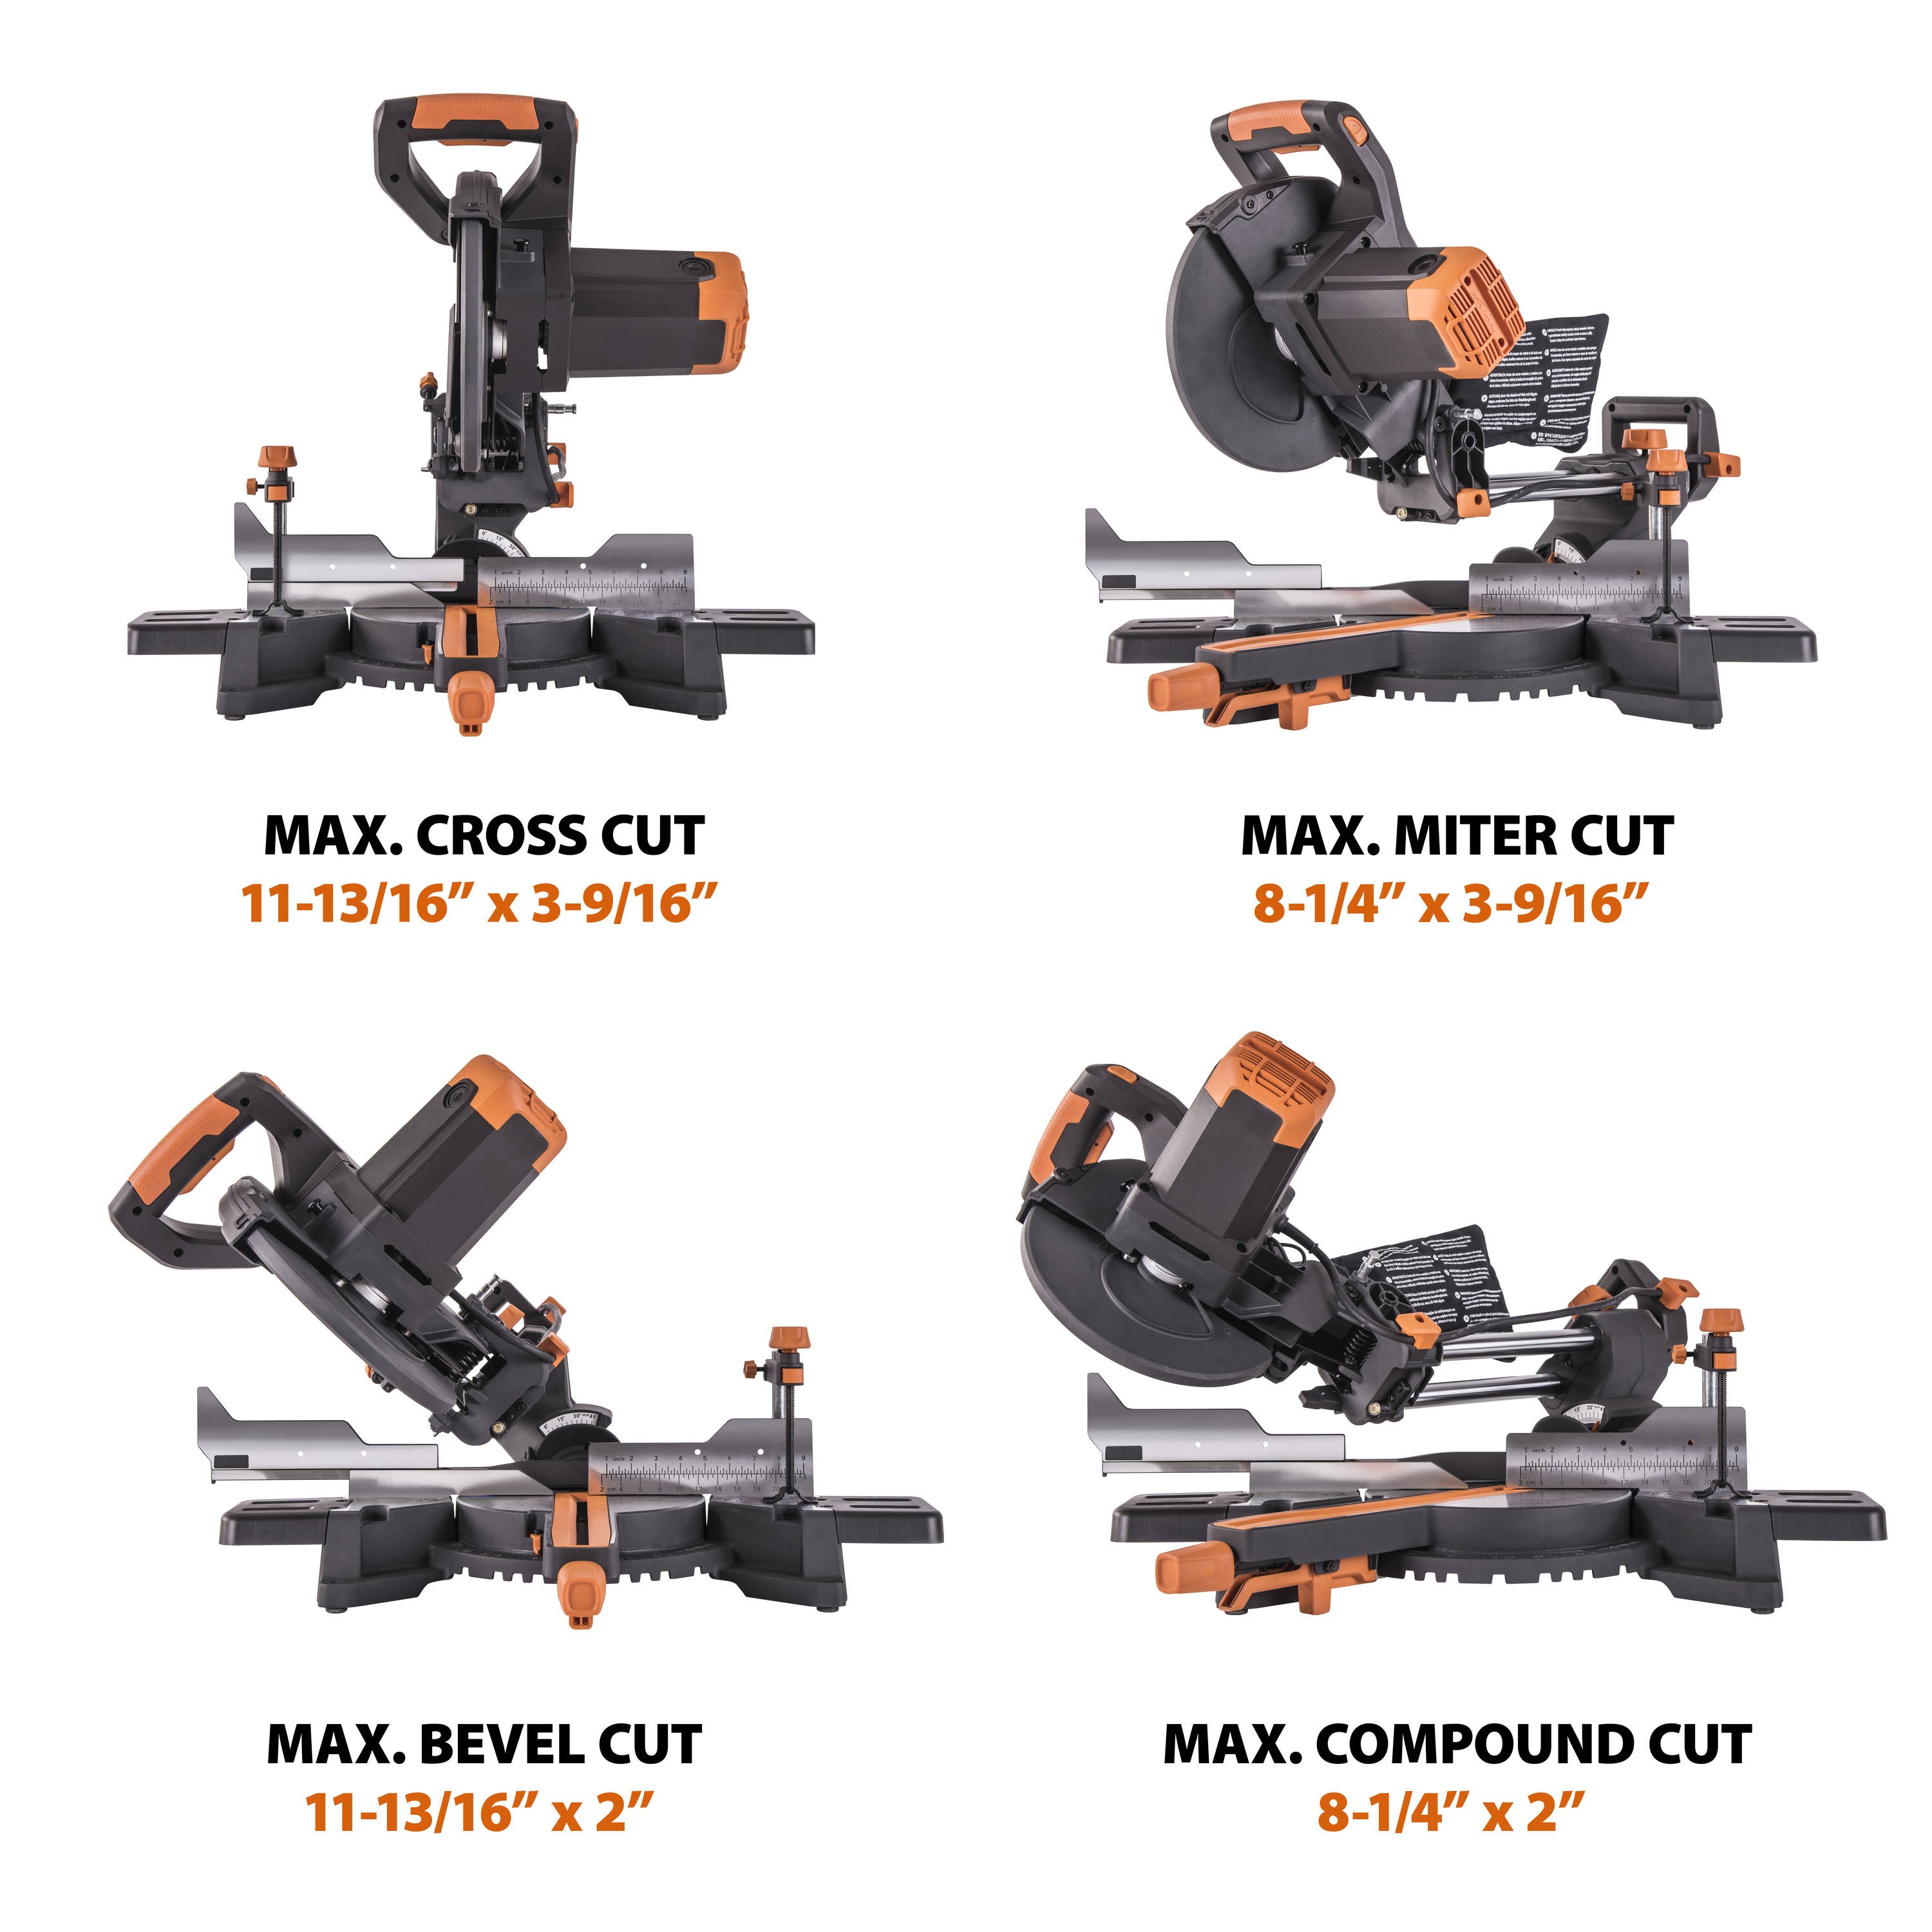 Evolution R255SMS+ 10-in 15-Amp Single Bevel Sliding Compound Corded Miter  Saw with Laser Guide in the Miter Saws department at